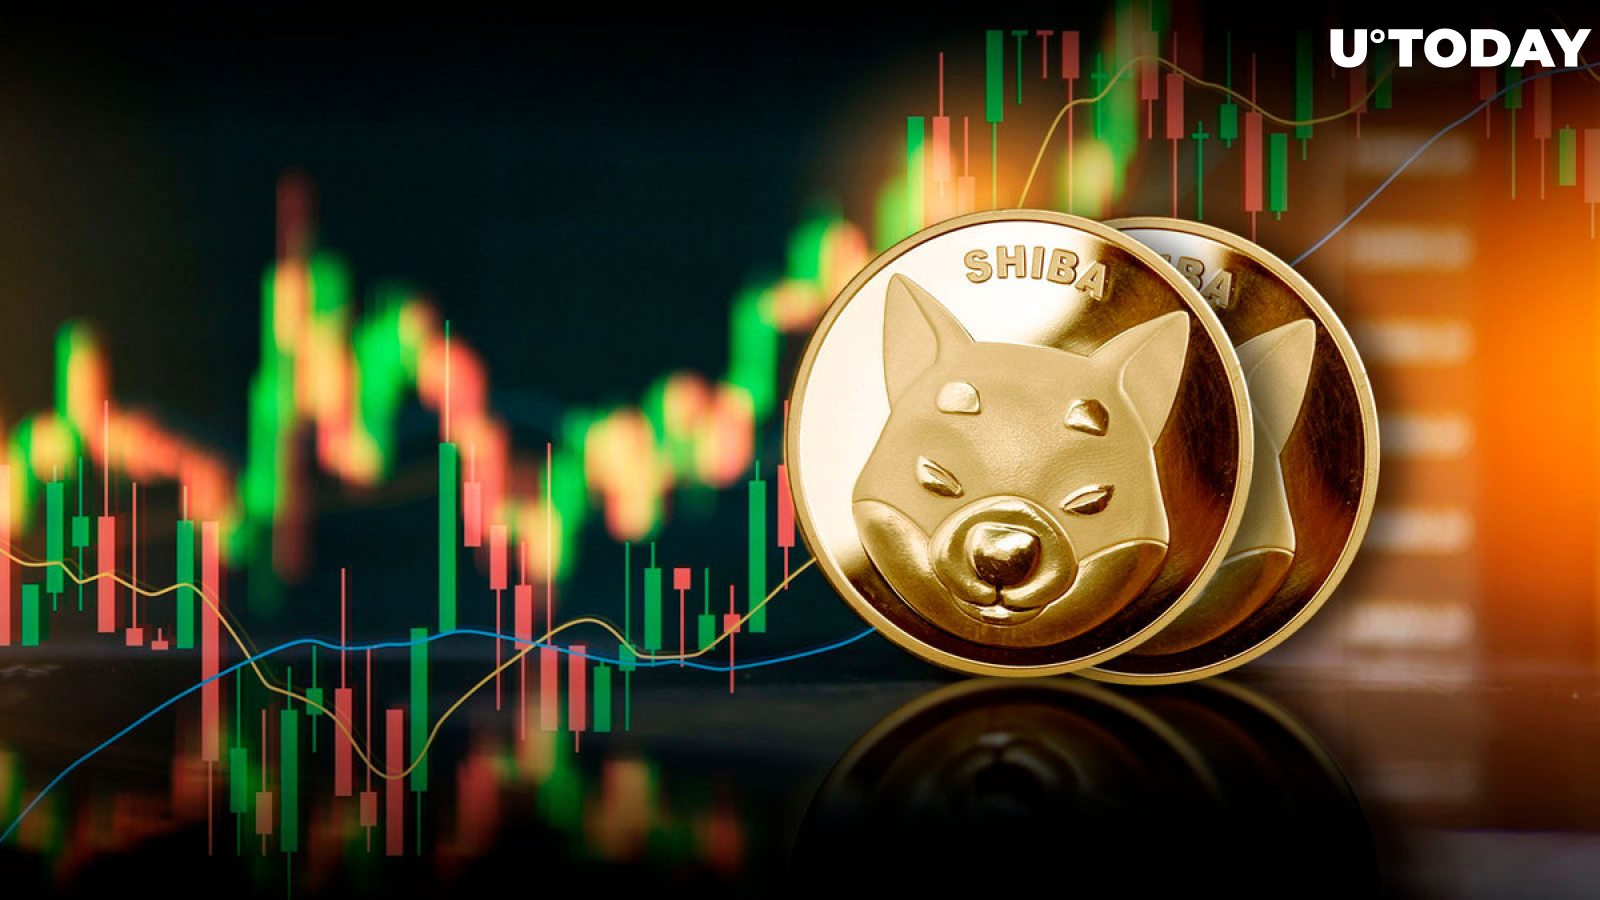 Large Shiba Inu (SHIB) Transactions Witness Jaw-Dropping 700% Surge in 2 Days